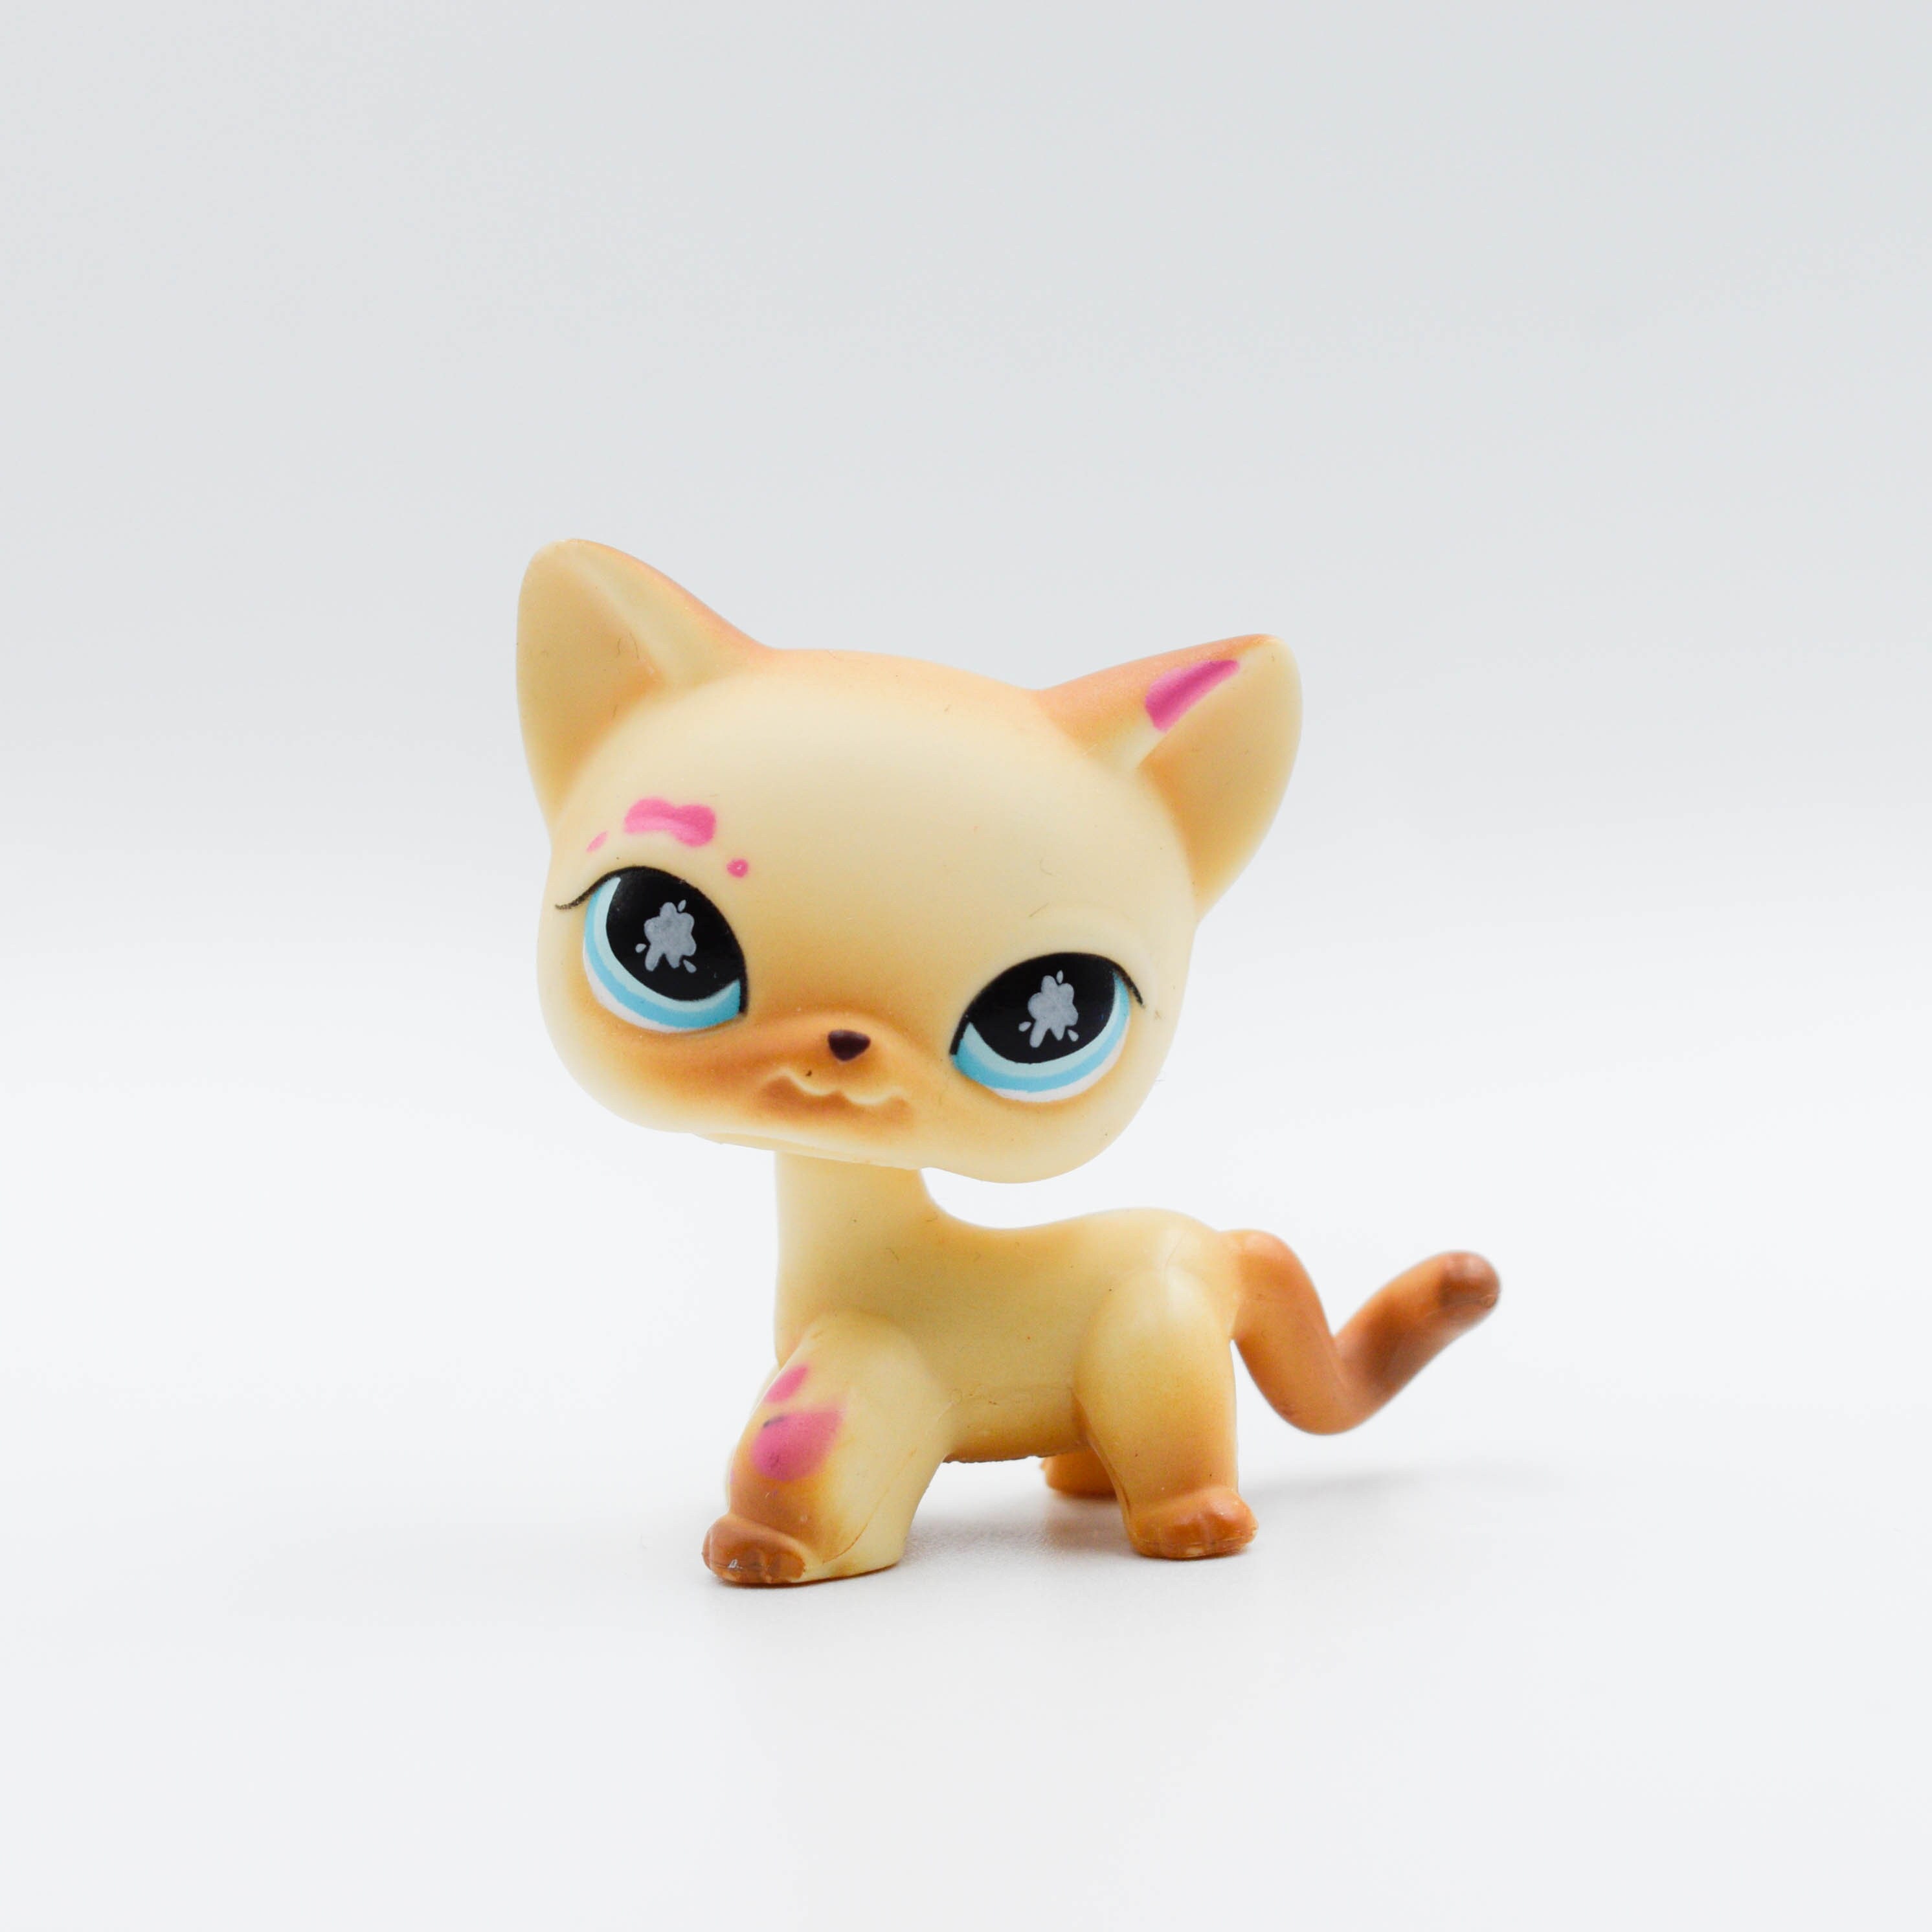 Littlest Pet Shops Is Getting A Wild, Food-Themed Makeover